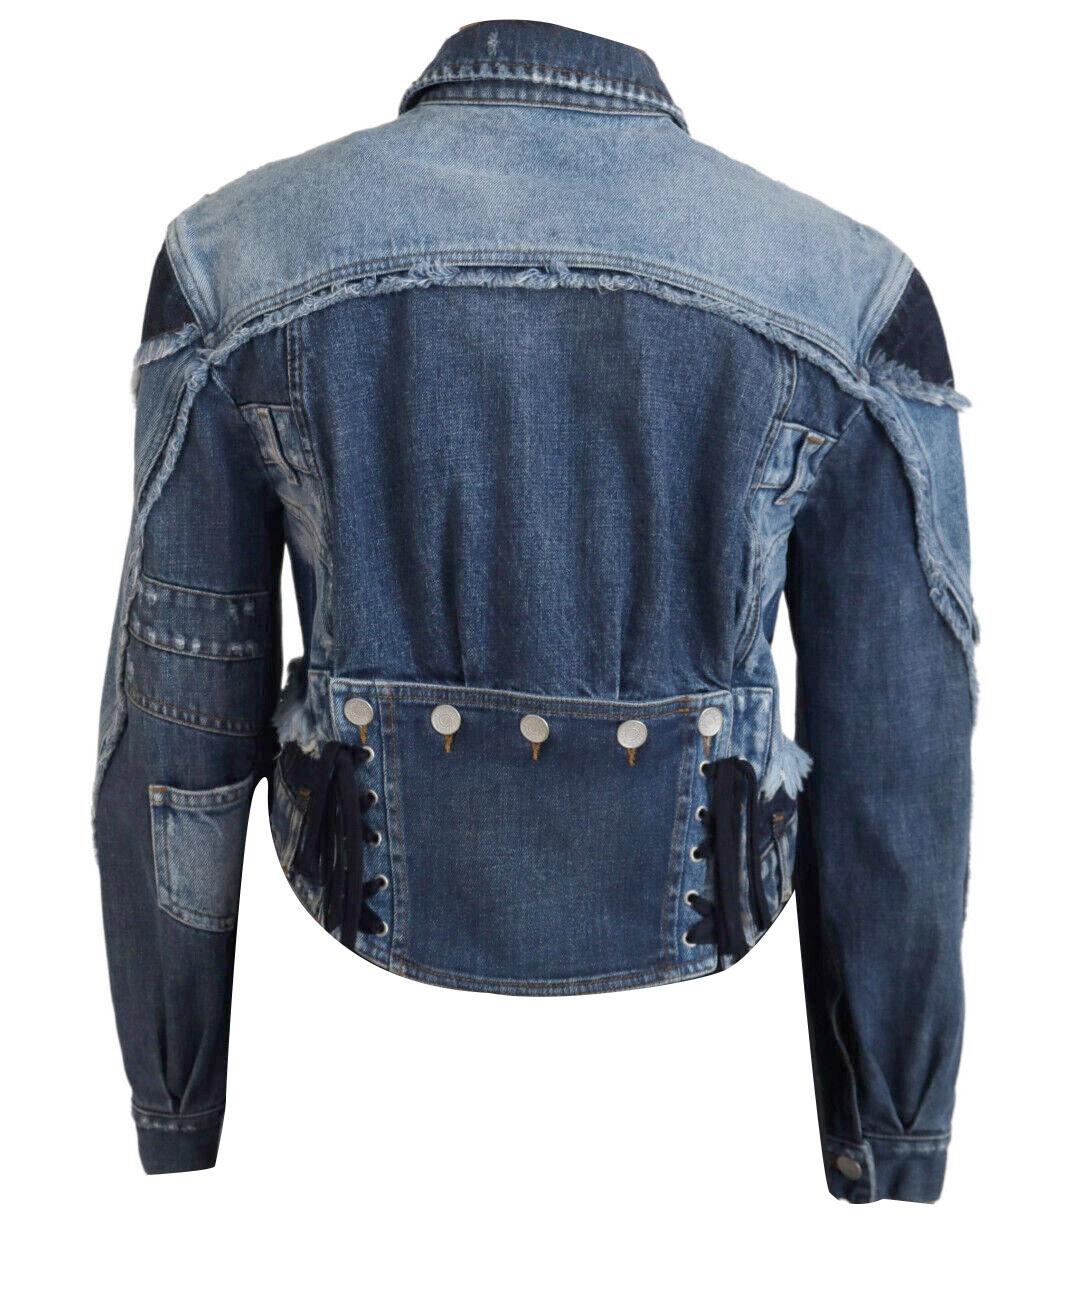 Dolce & Gabbana 

Gorgeous brand new with tags, 100% Authentic Dolce & Gabbana jacket.

Model: Jacket short blouson

Color: Blue wash
Button closure

Logo details

Made in Italy

Very exclusive and high craftsmanship

Material: 100% Cotton

SIZE: